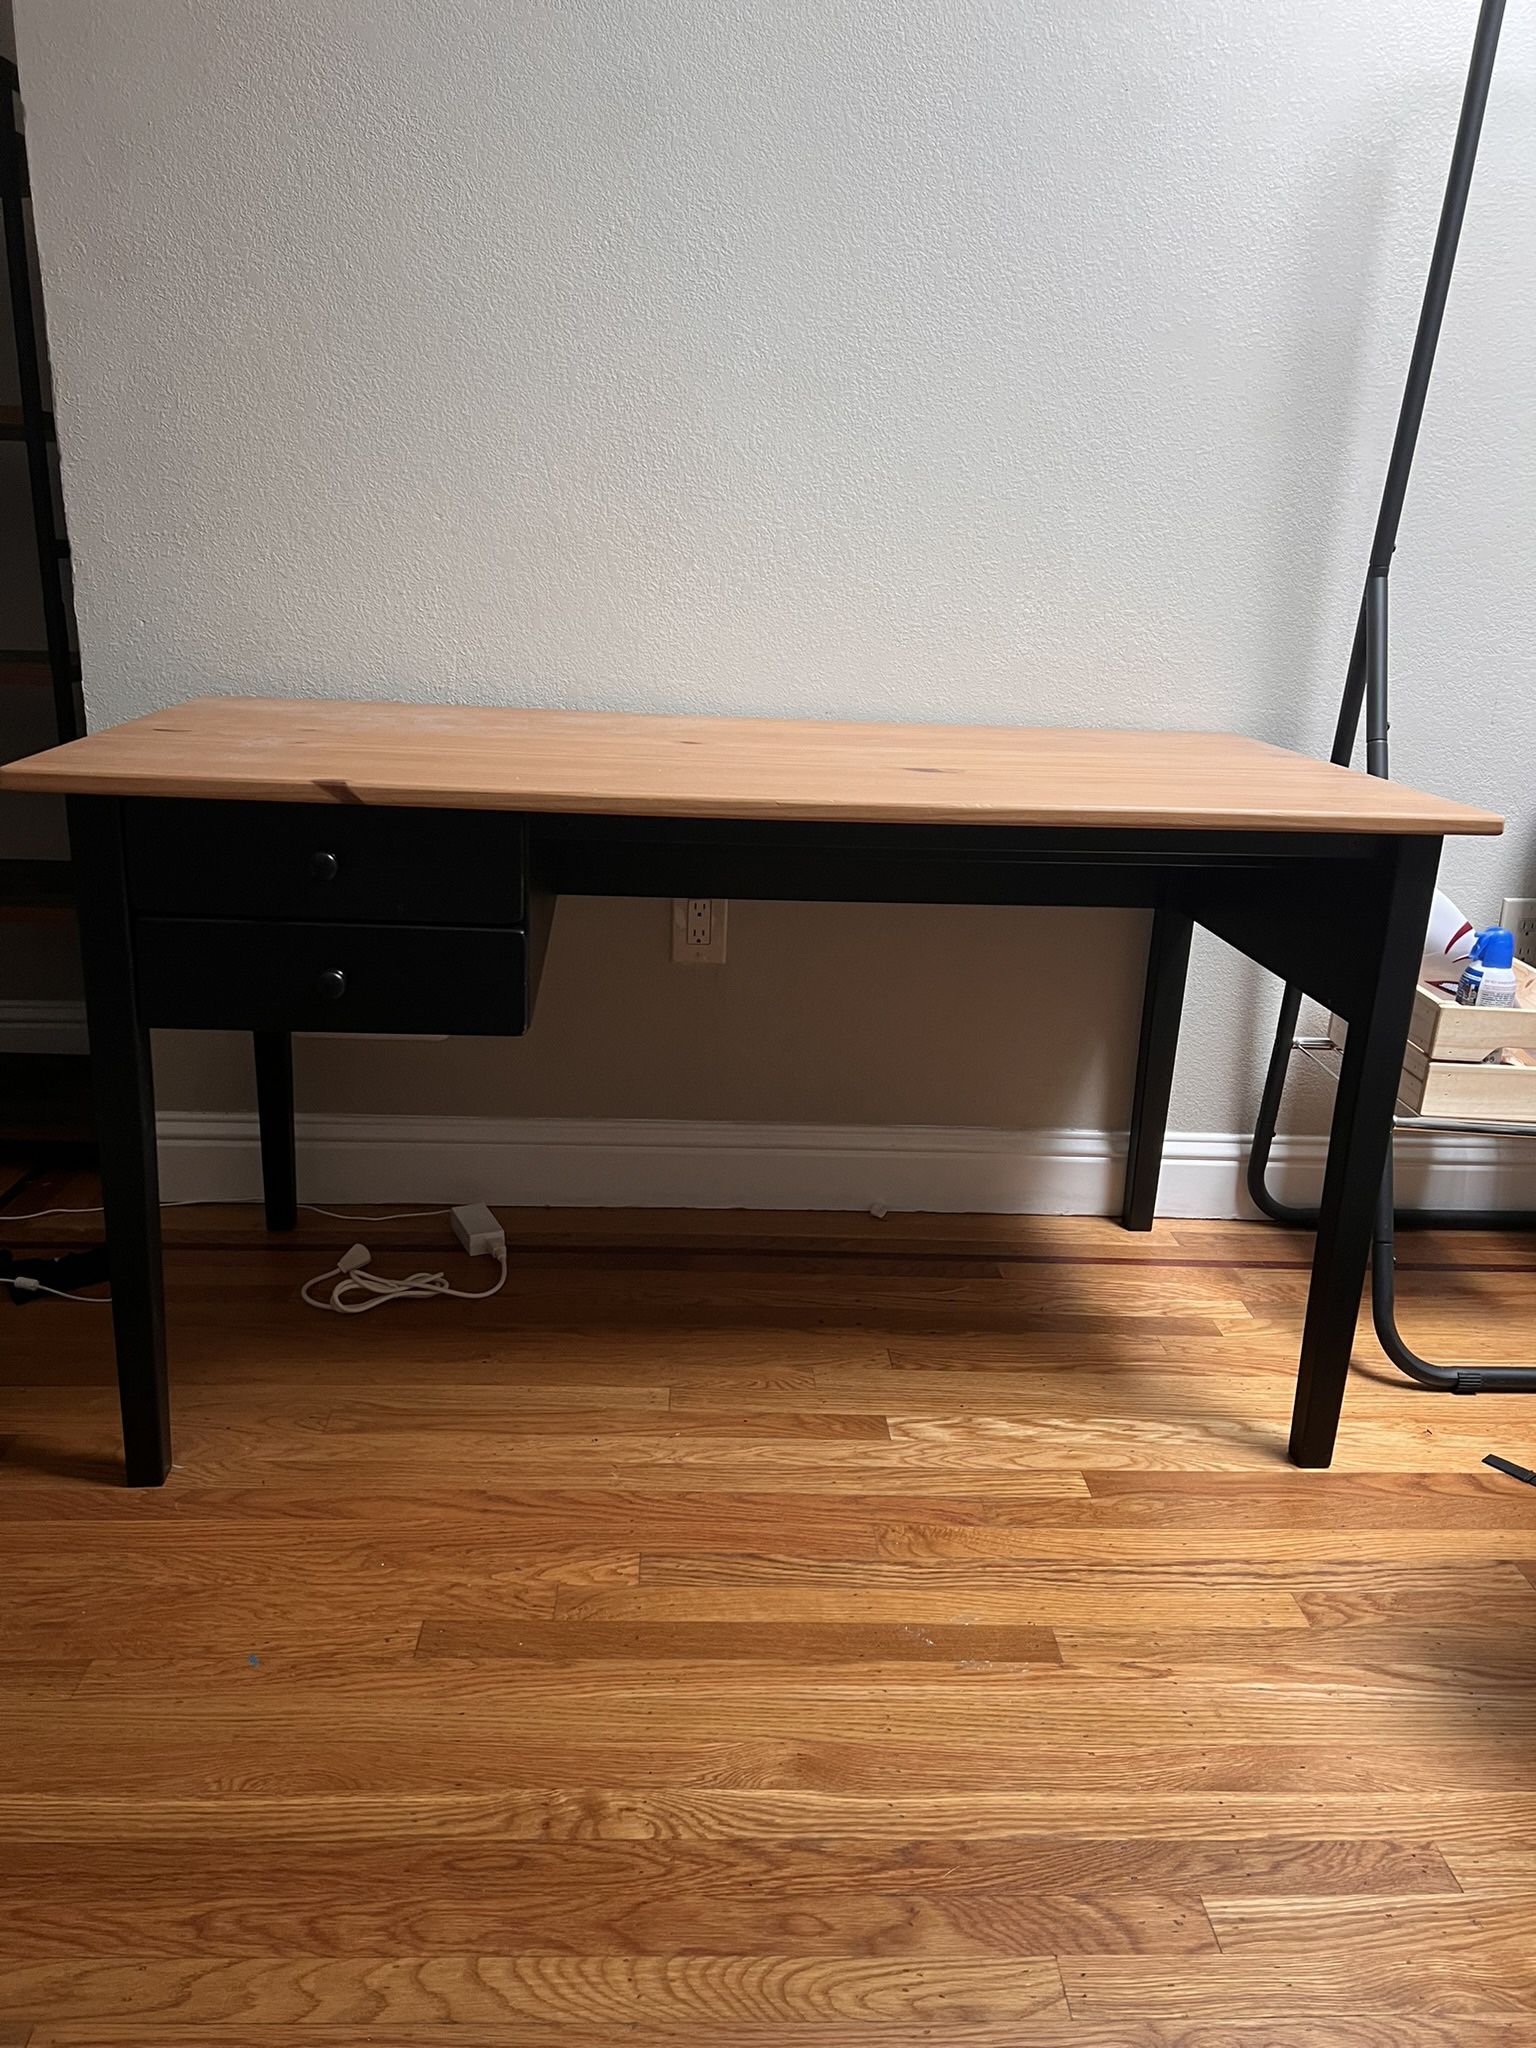 55" Wooden Desk with Drawers